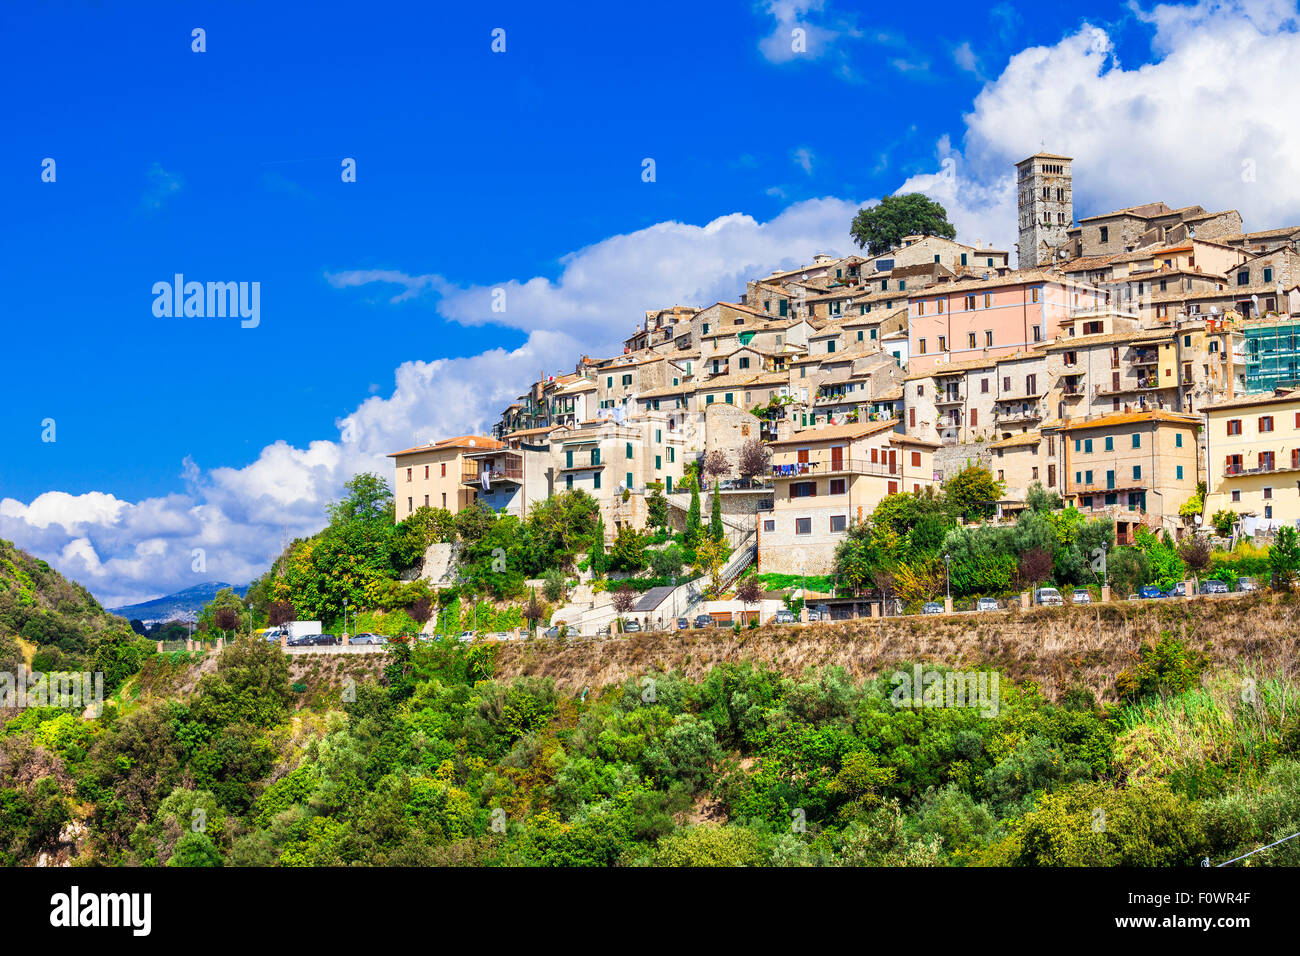 Province Of Rieti Stock Photos & Province Of Rieti Stock Images - Alamy